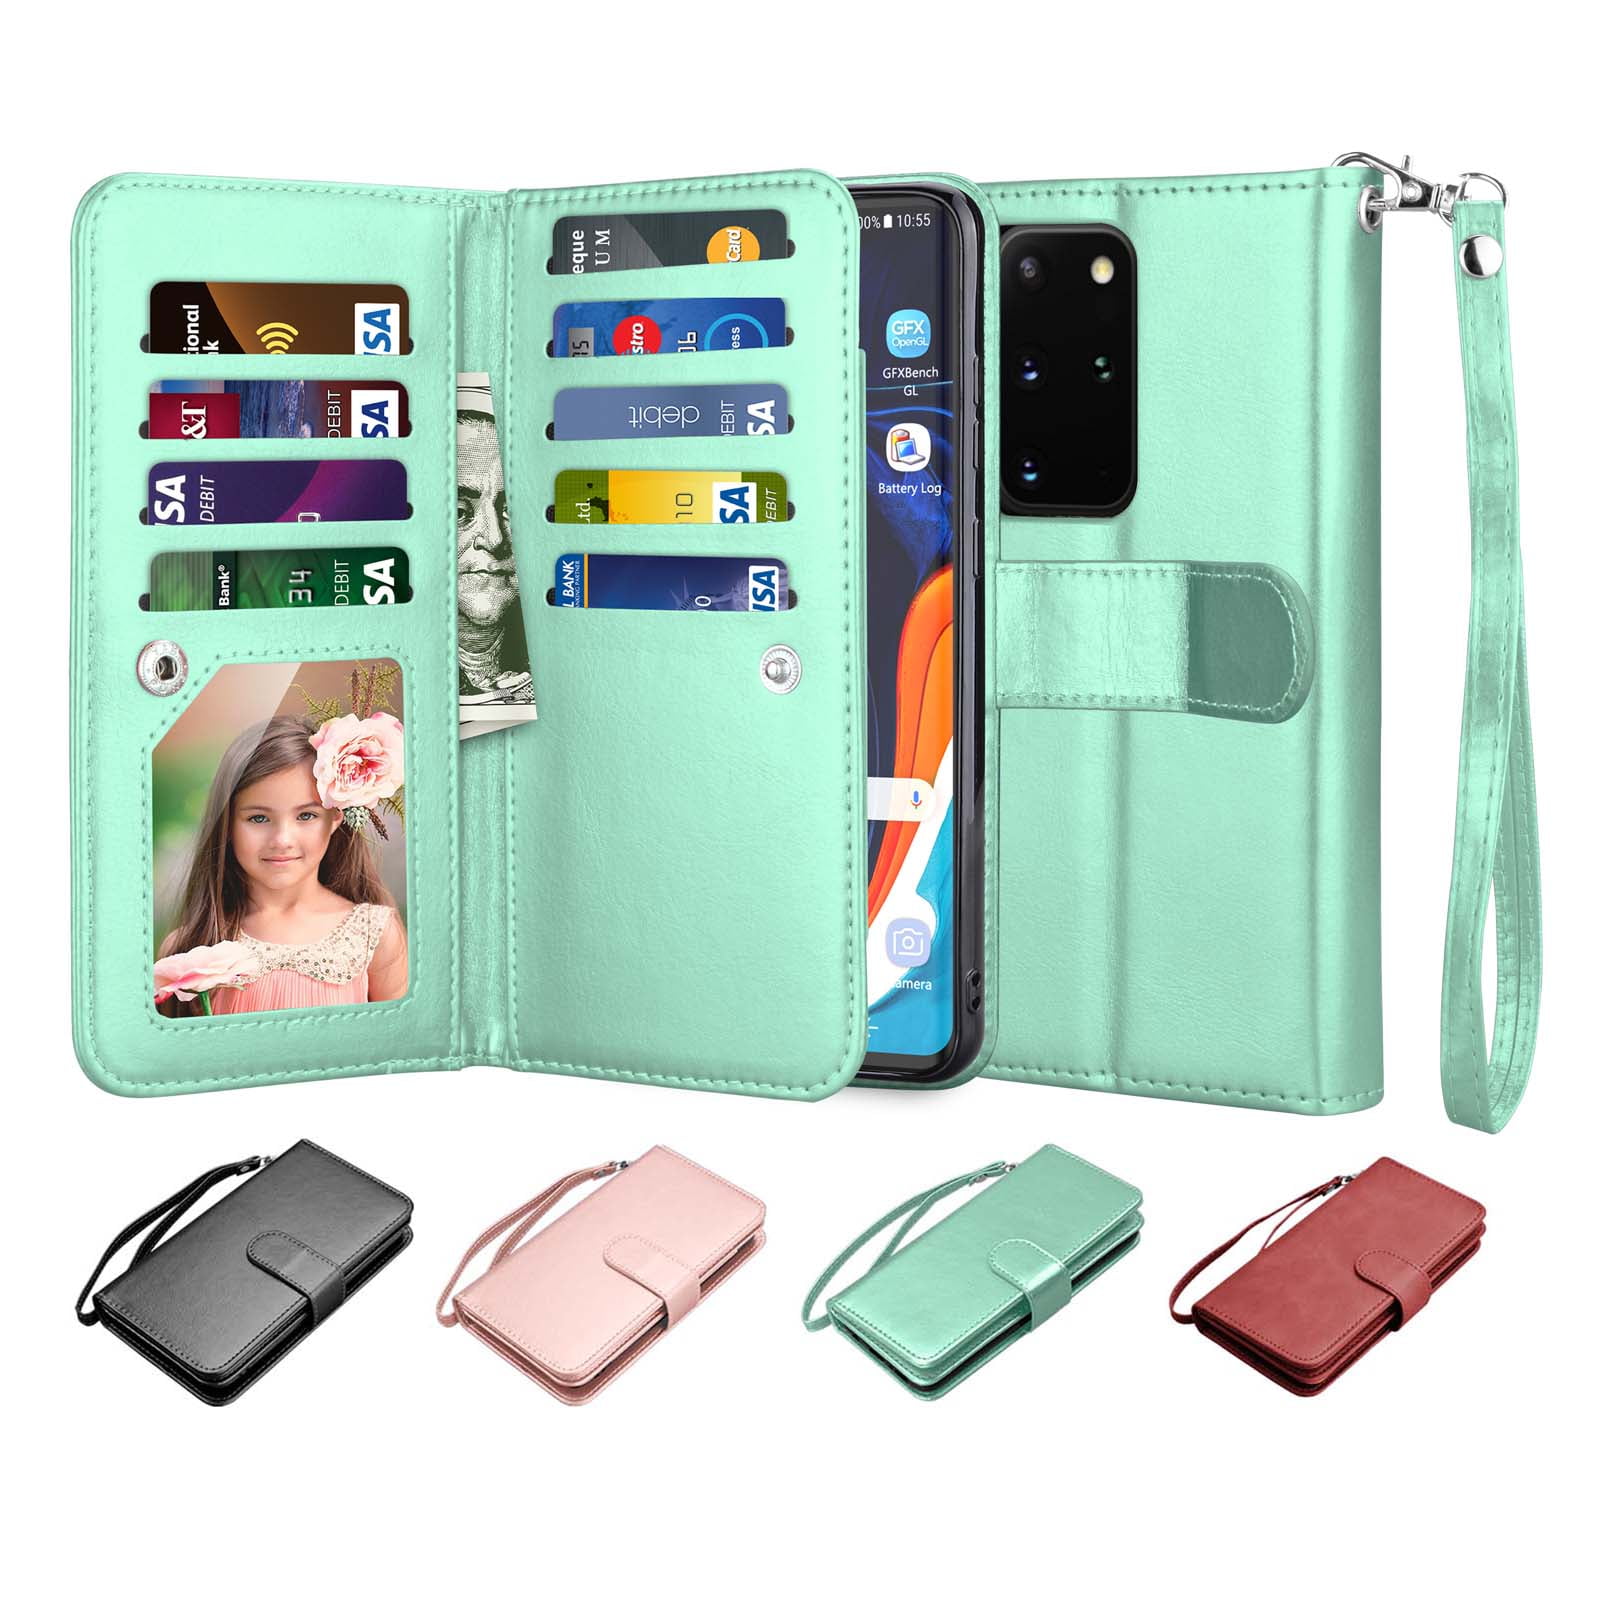 Handmade Flip Folio Wallet Case with Card Slots and Detachable Hand Strap for Samsung Galaxy S20 6.2 2020,Pink Skycase Galaxy S20 Case 5G 6.2 RFID Blocking Samsung Galaxy S20 Wallet Case, 